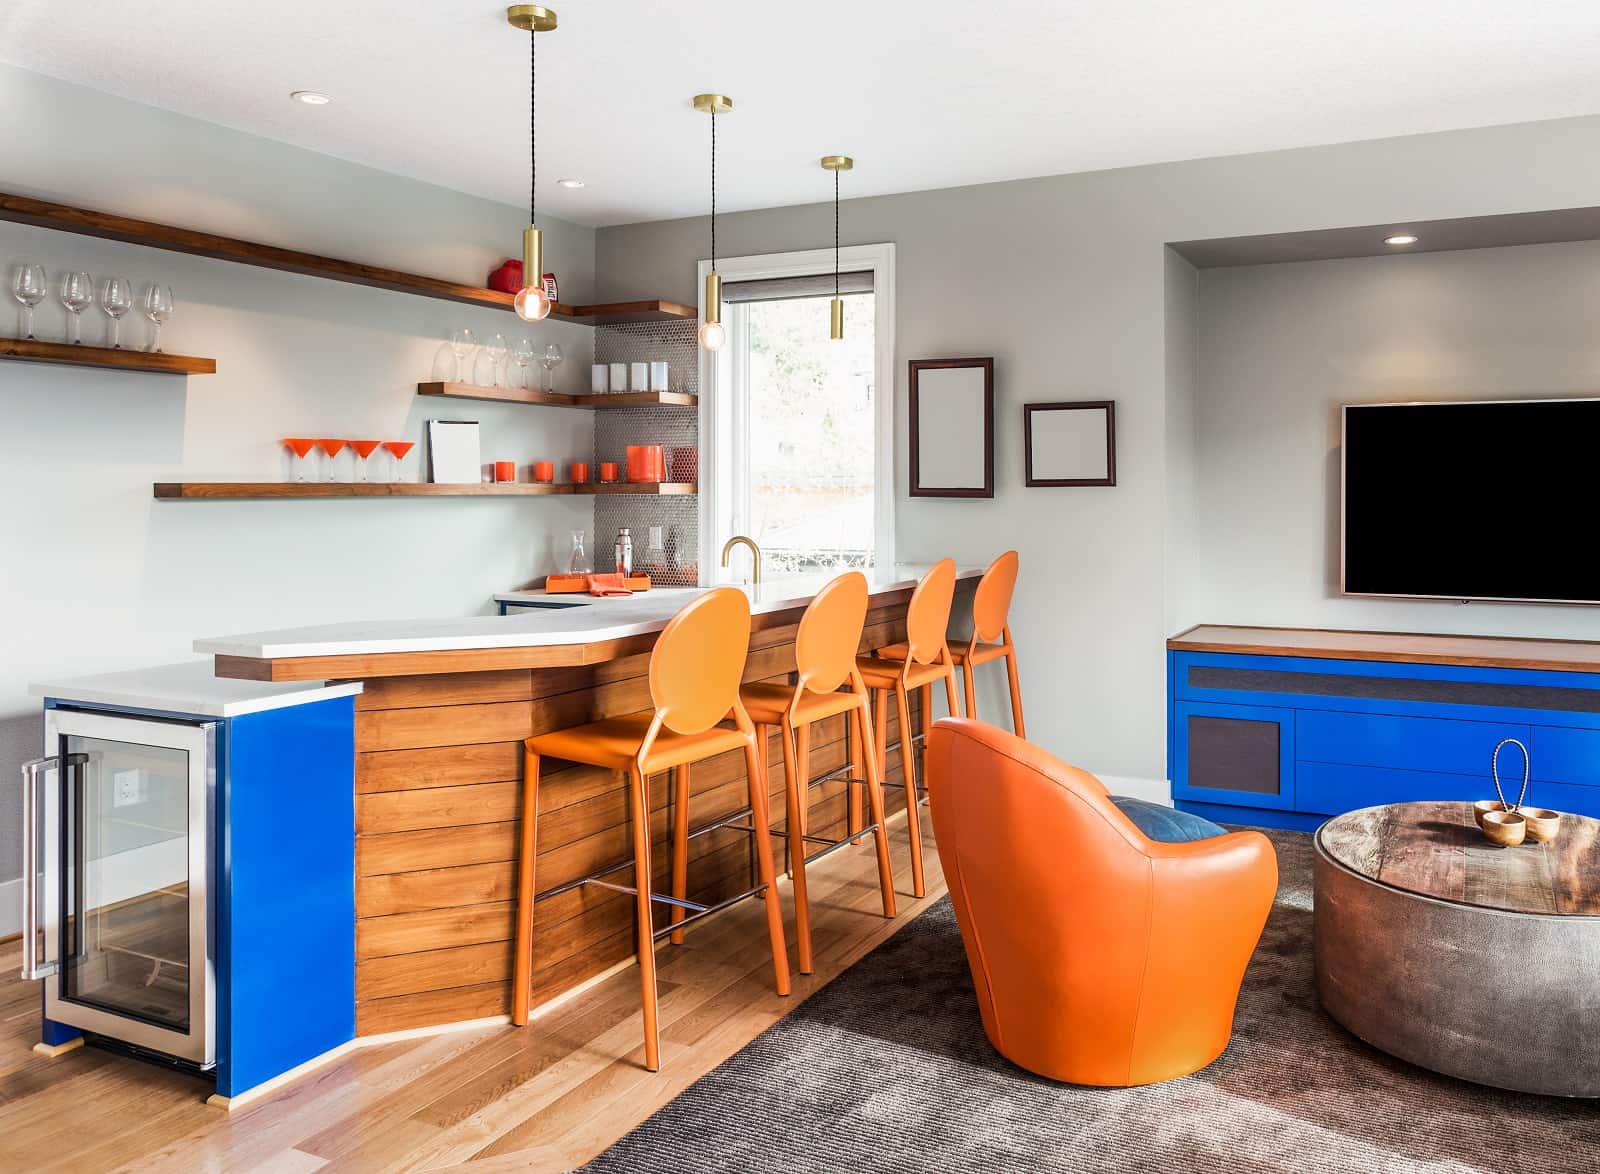 5 Tips For Setting Up A Fun Entertainment Space. Great colorful sitting room combined with kitchen